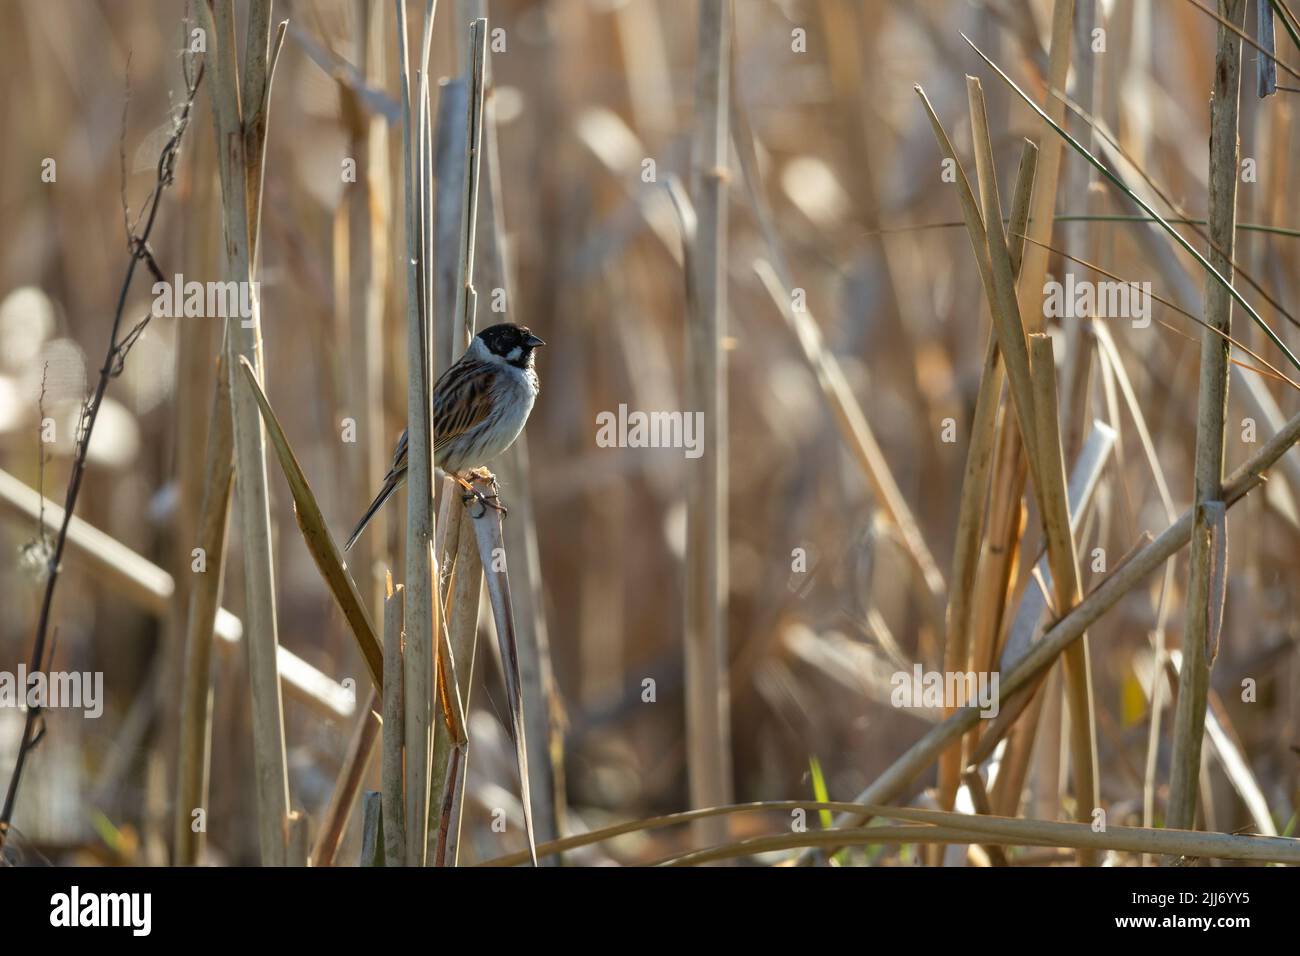 Common reed bunting Emberiza schoeniclus, adult male perched on Common bulrush Typha latifolia, Weston-Super-Mare, Somerset, UK, March Stock Photo